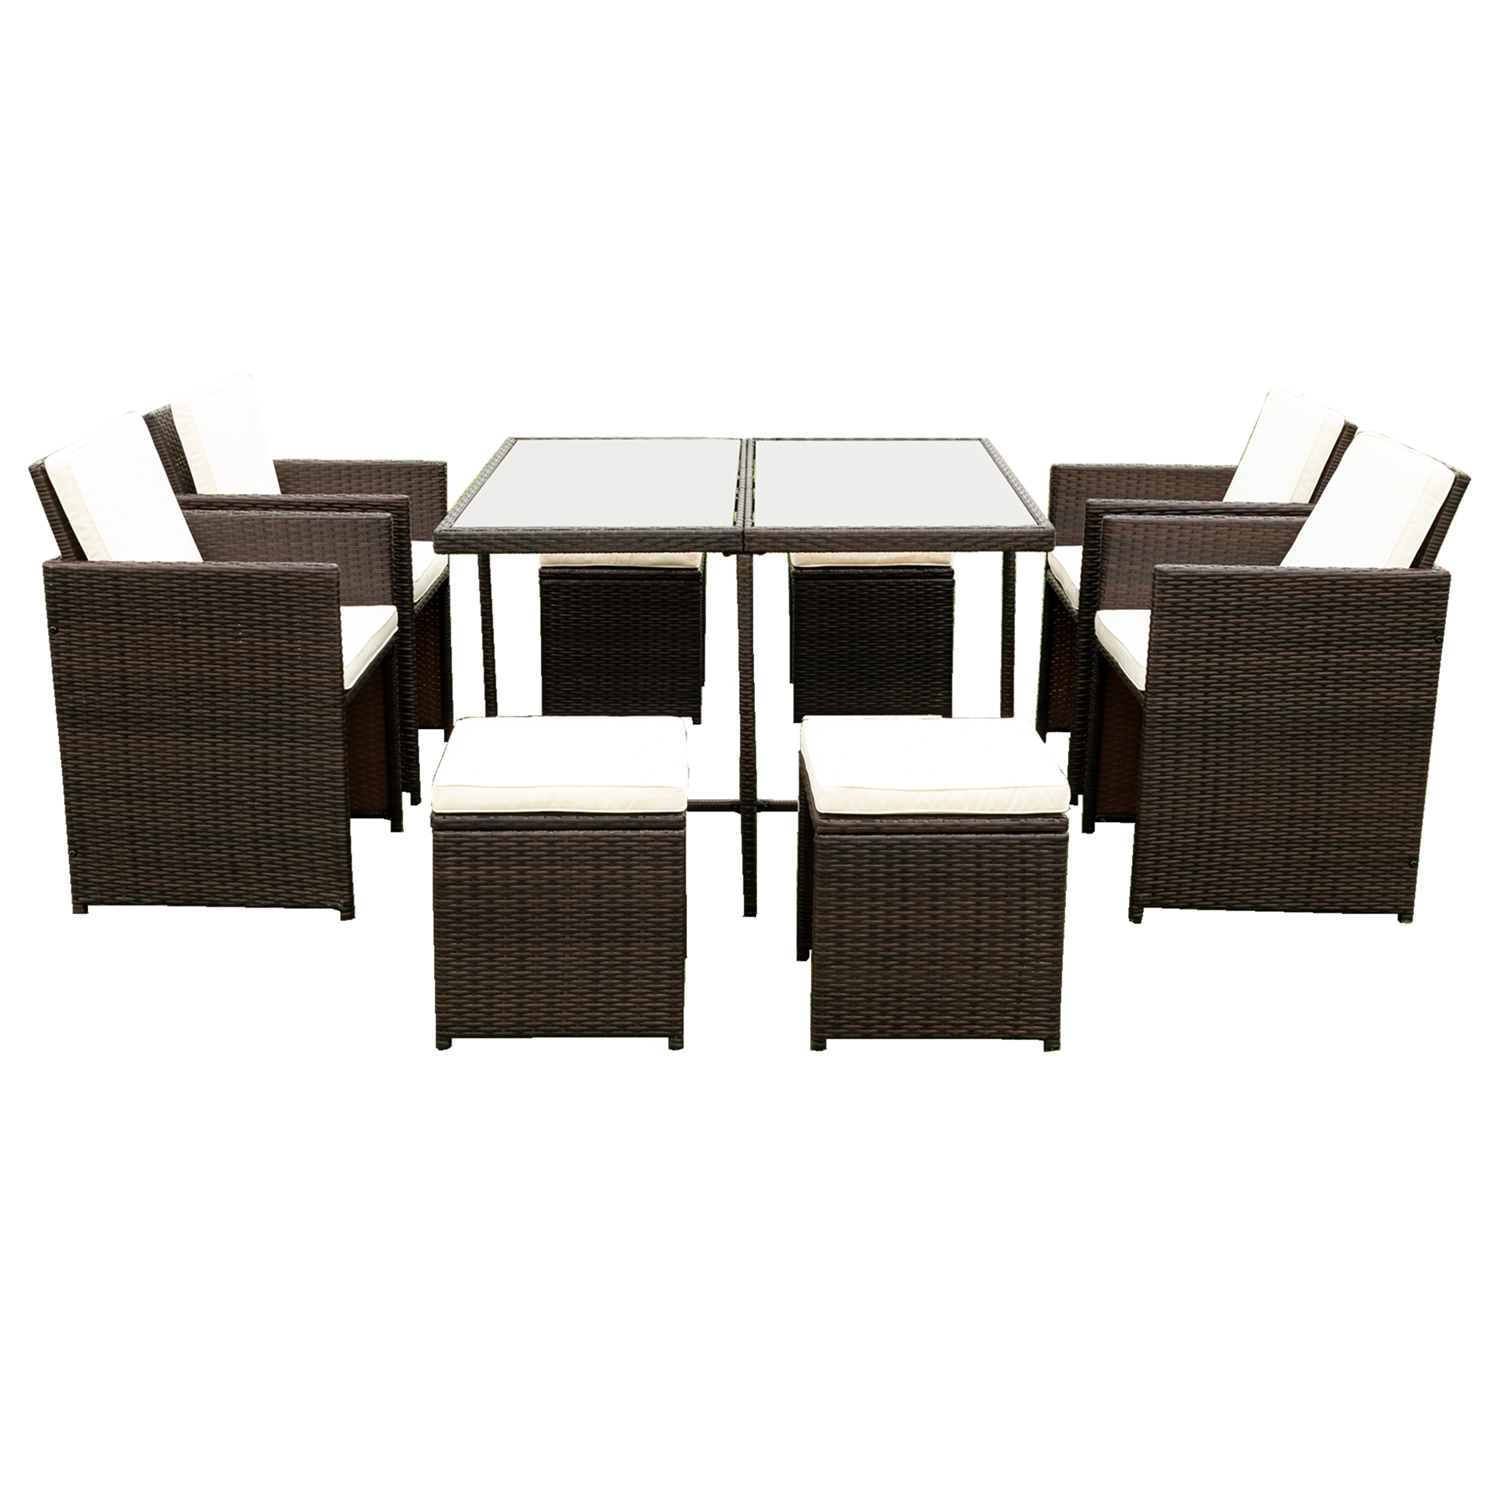 Outdoor Furniture Patio Sets, All-Weather Rattan Conversation Sofa with Glass Coffee Table, Patio Dining Sets, PE Rattan, Outdoor Garden Sectional Sofa Chair, Soft Cushions (9-Piece,Dark Brown) - image 5 of 9